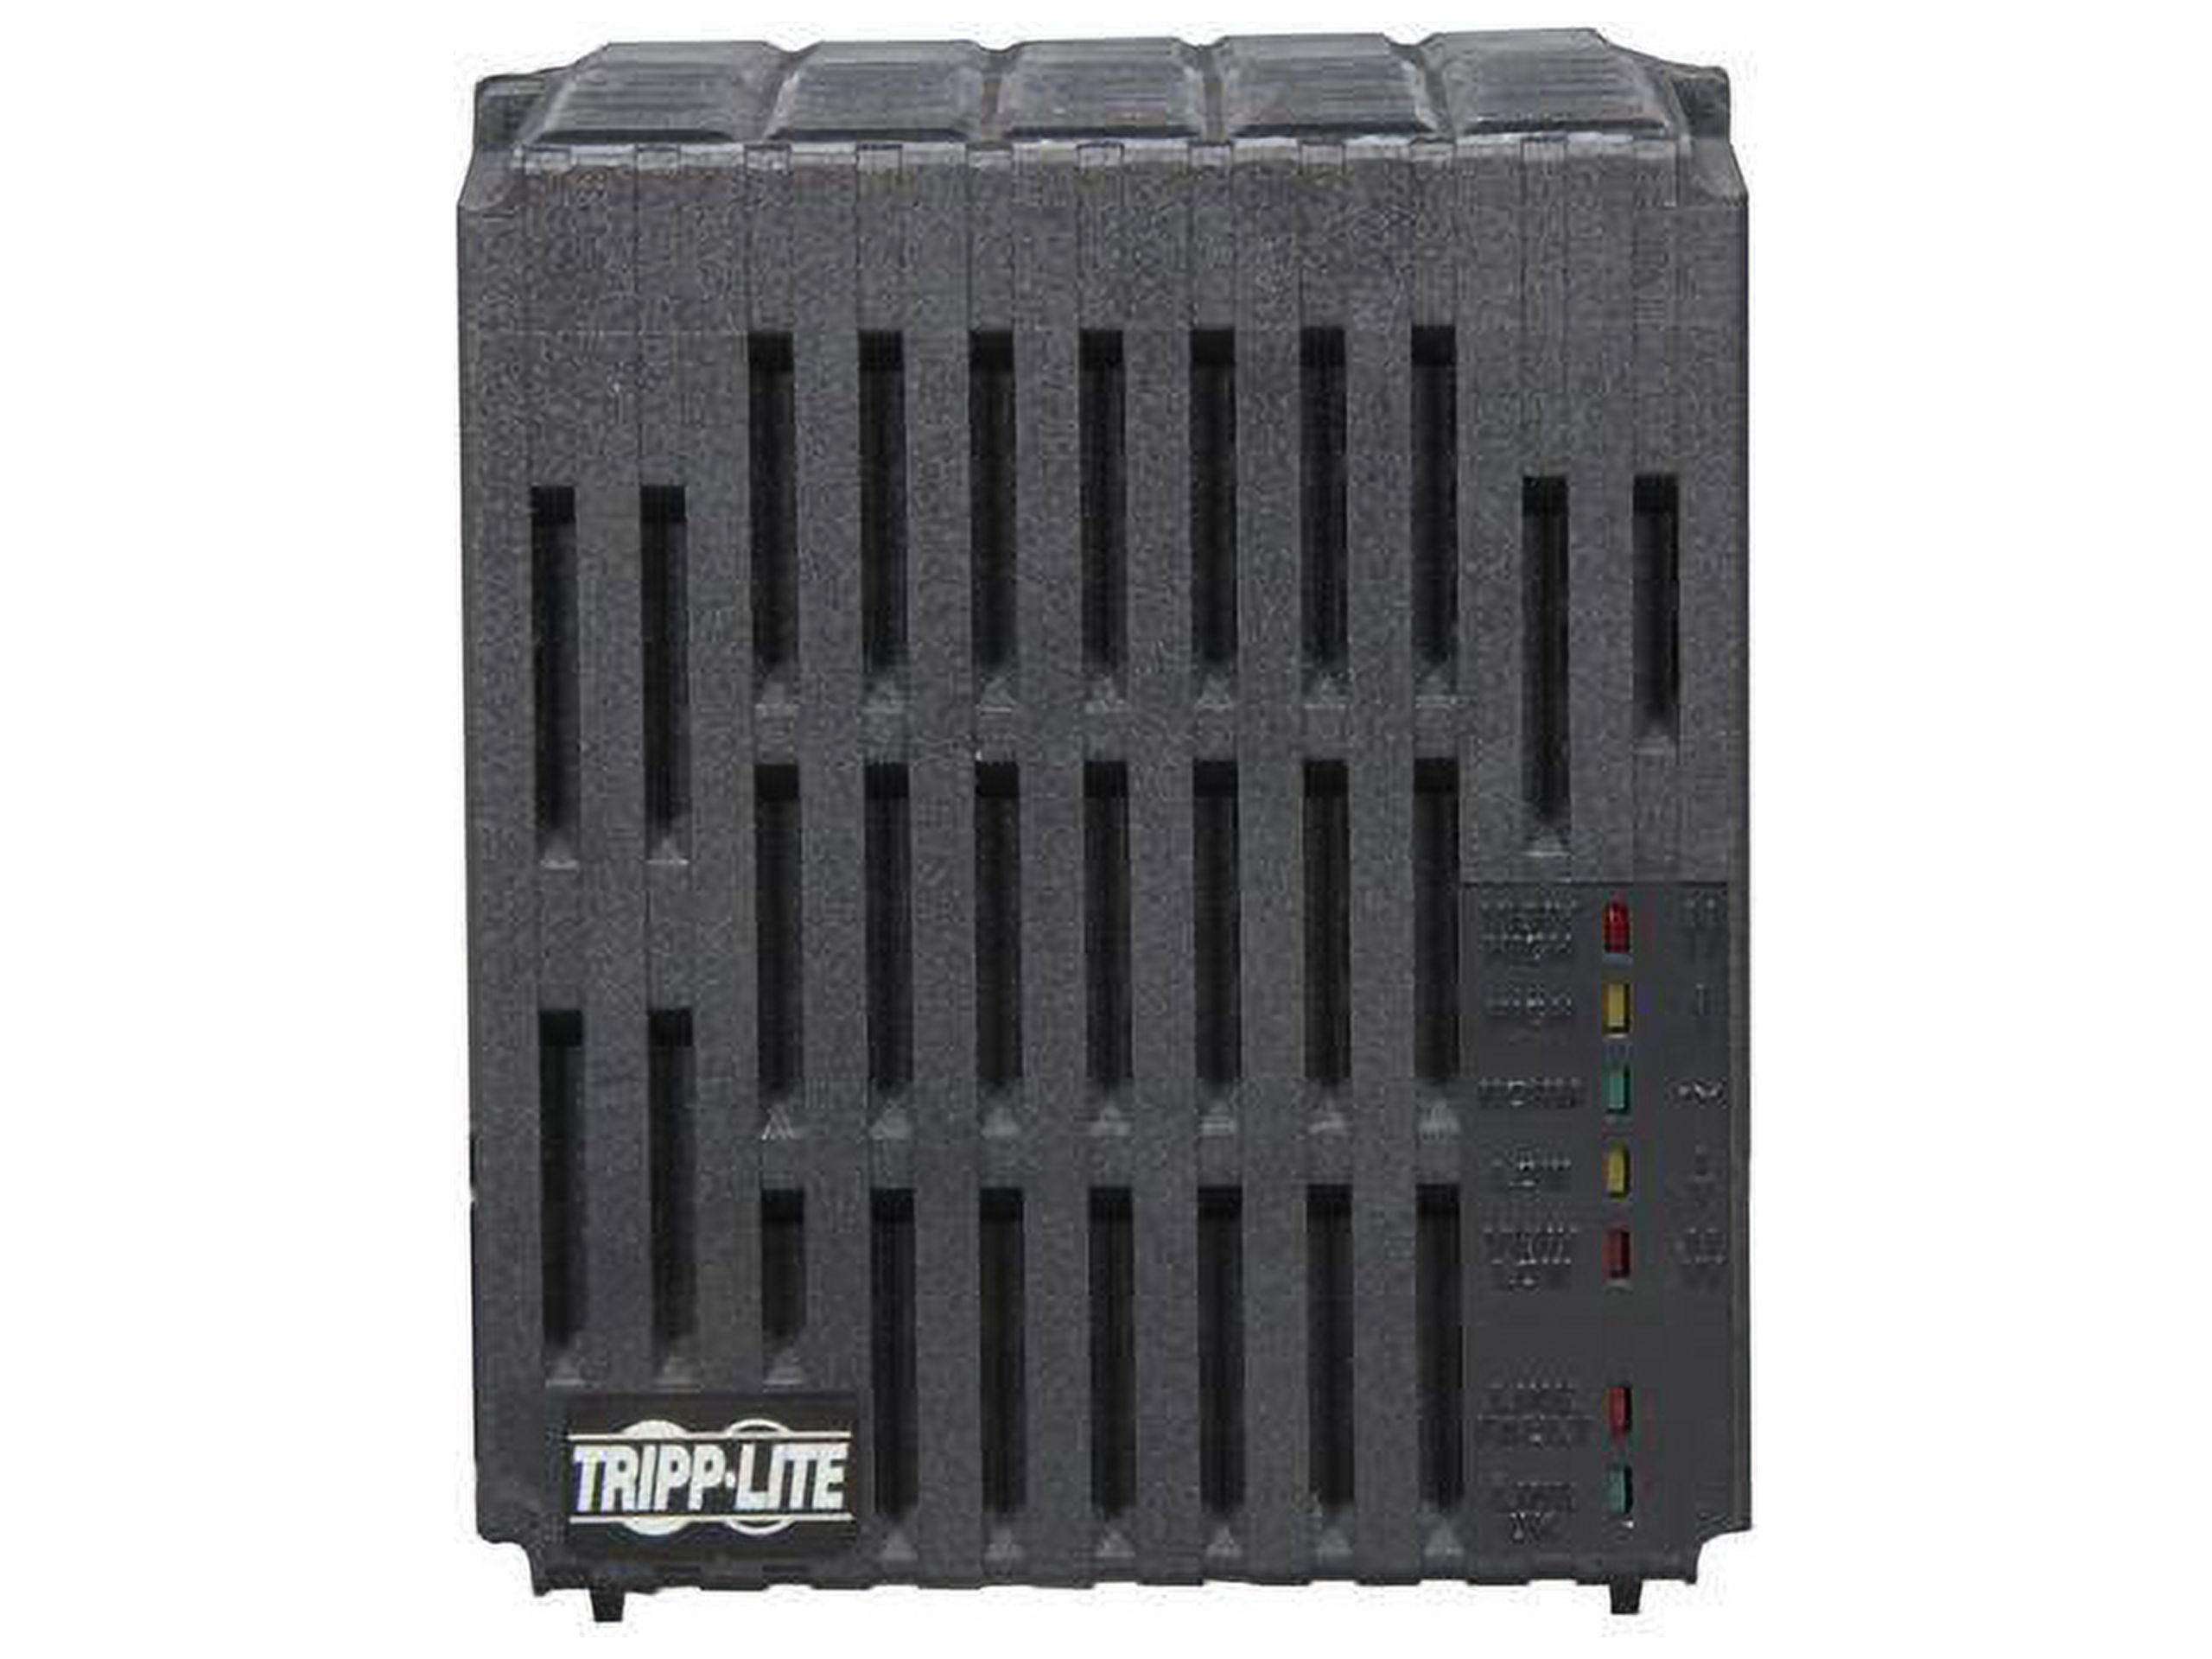 TRIPP LITE LC2400 Line Conditioner - Automatic Voltage Regulation with Surge Protection - image 3 of 6